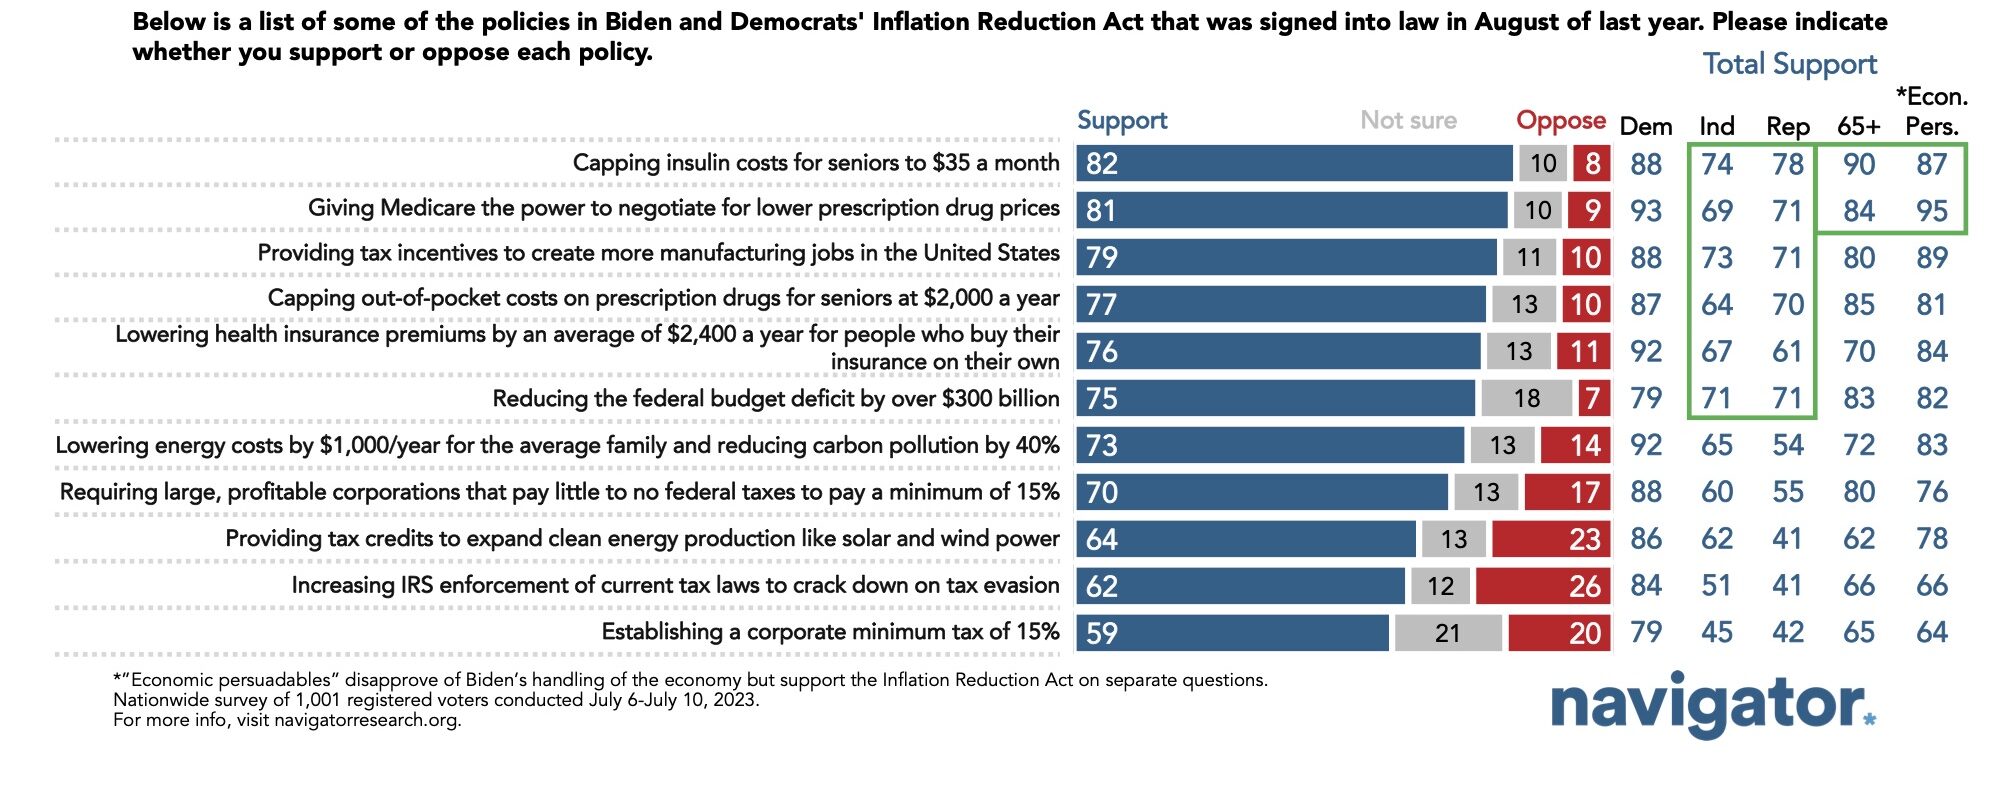 Survey results to the following prompt: Below is a list of some of the policies in Biden and Democrats' Inflation Reduction Act that was signed into law in August of last year. Please indicate whether you support or oppose each policy.